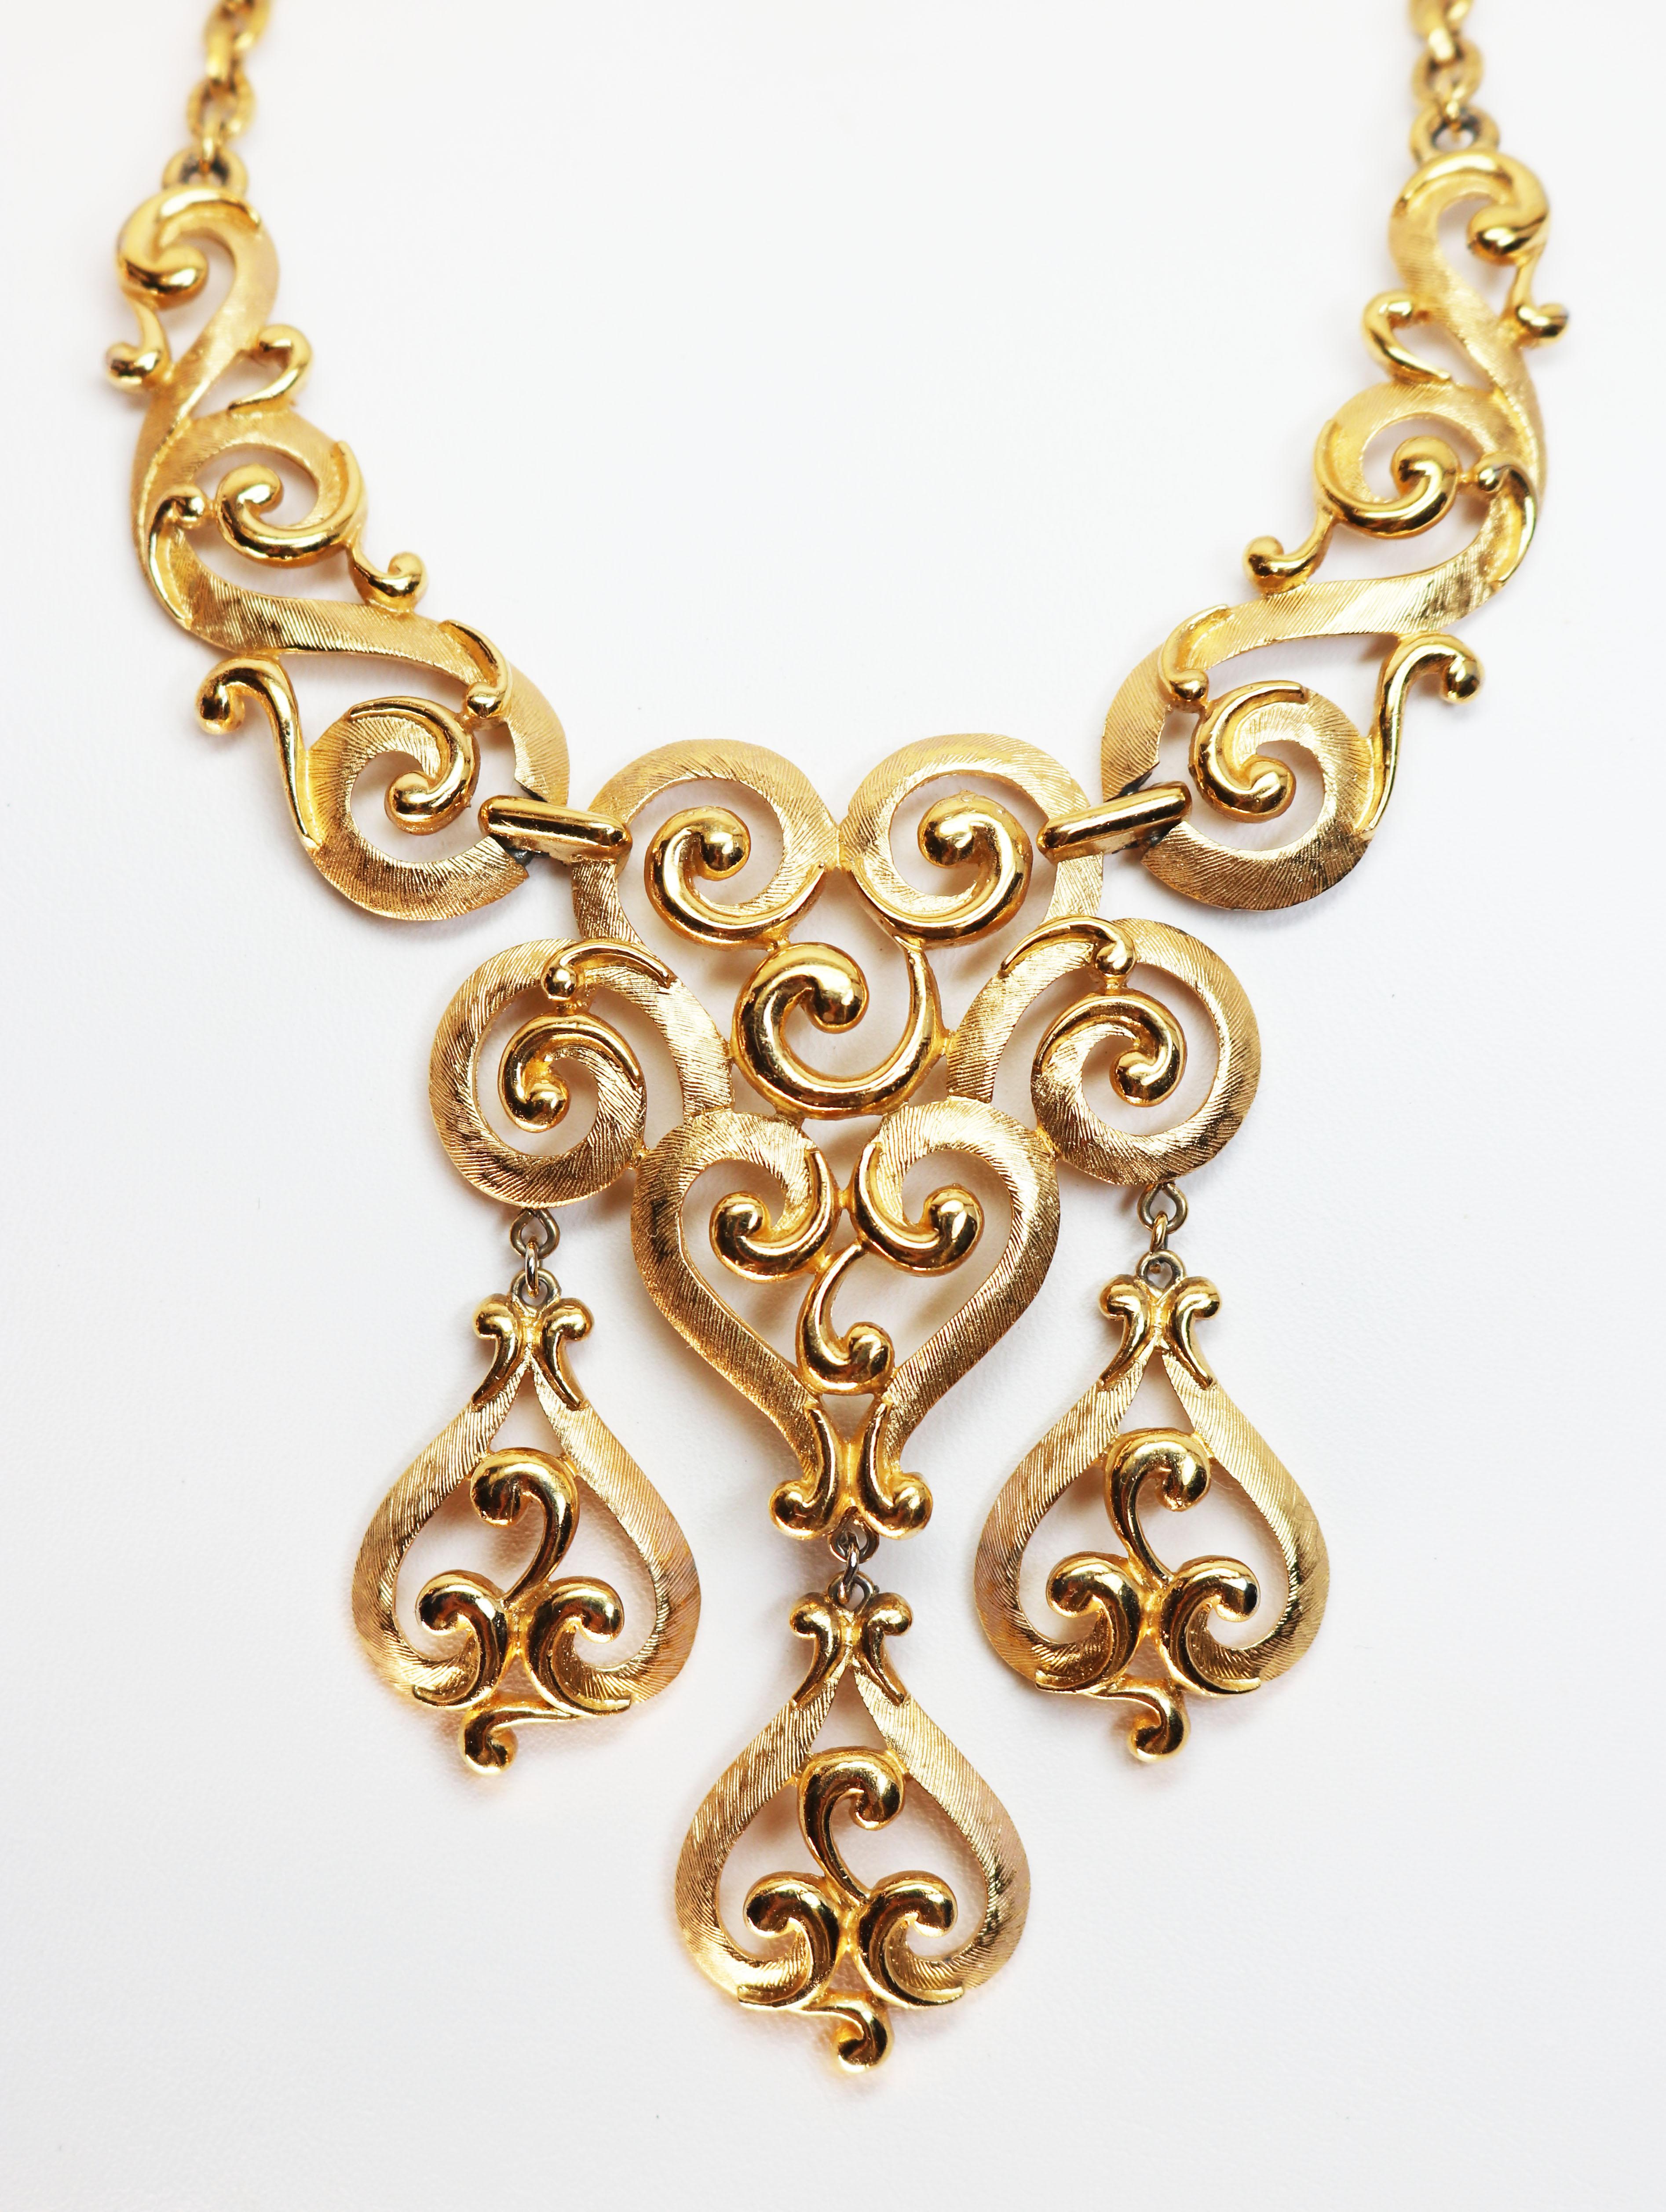 This Trifari piece has both matte and polished golden links in an elegant swirling heart shaped design. It can be adjusted to fit around your neck perfectly with the bib look which is so popular. This necklace features three articulated pendants